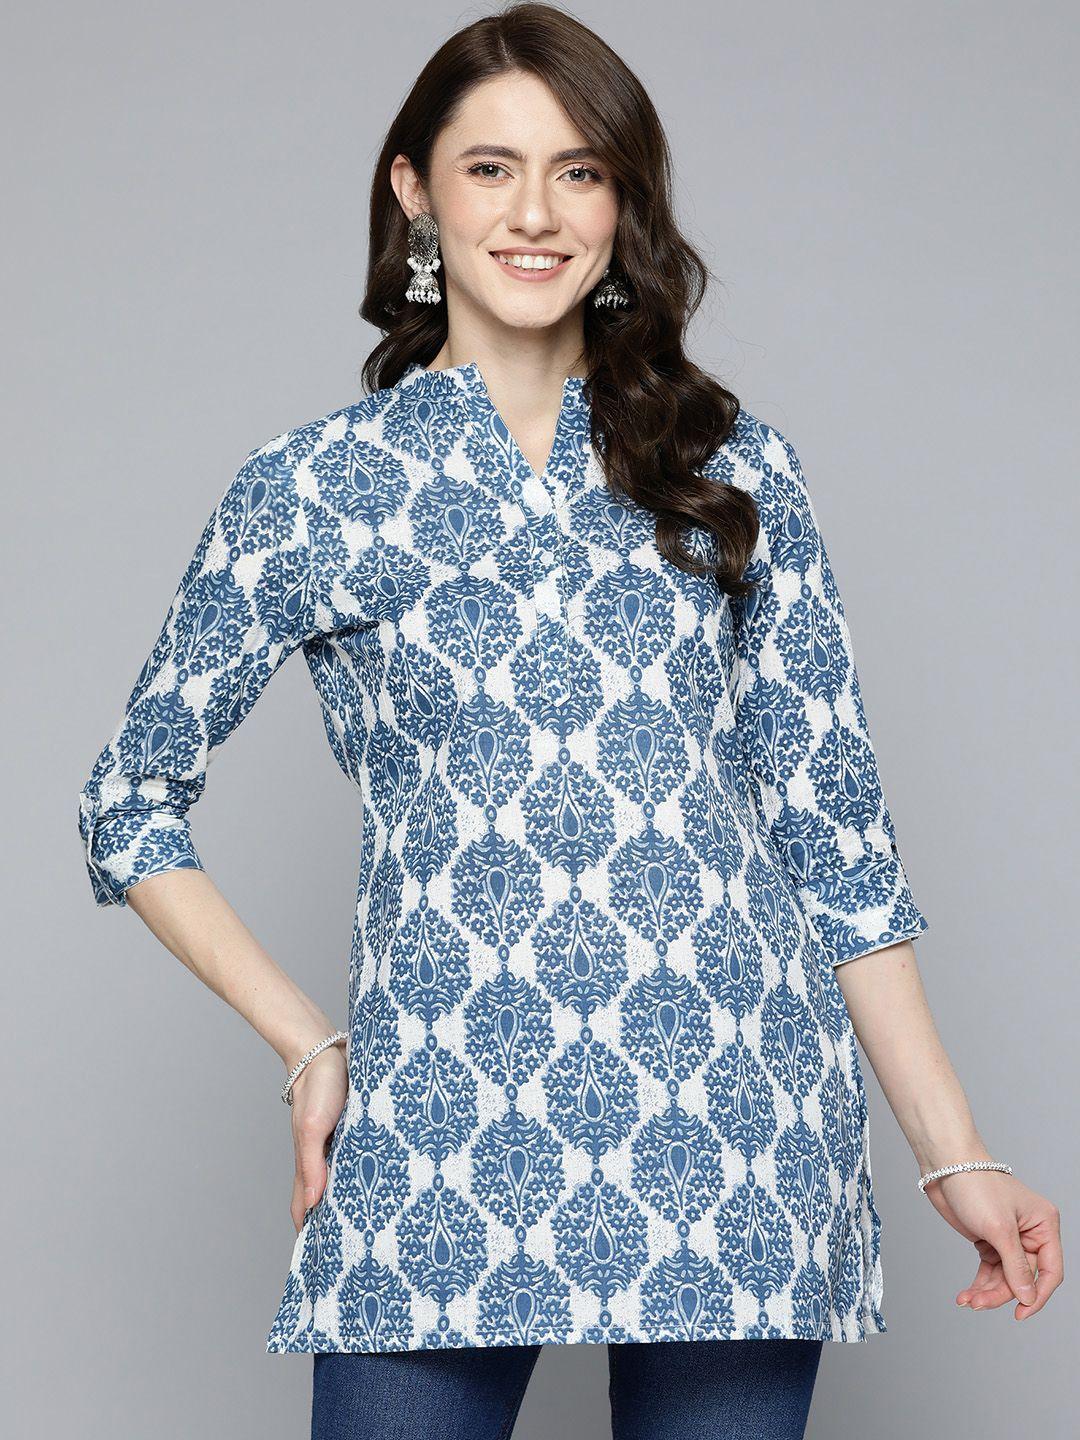 here&now white & navy blue ethnic motifs printed pure cotton kurti